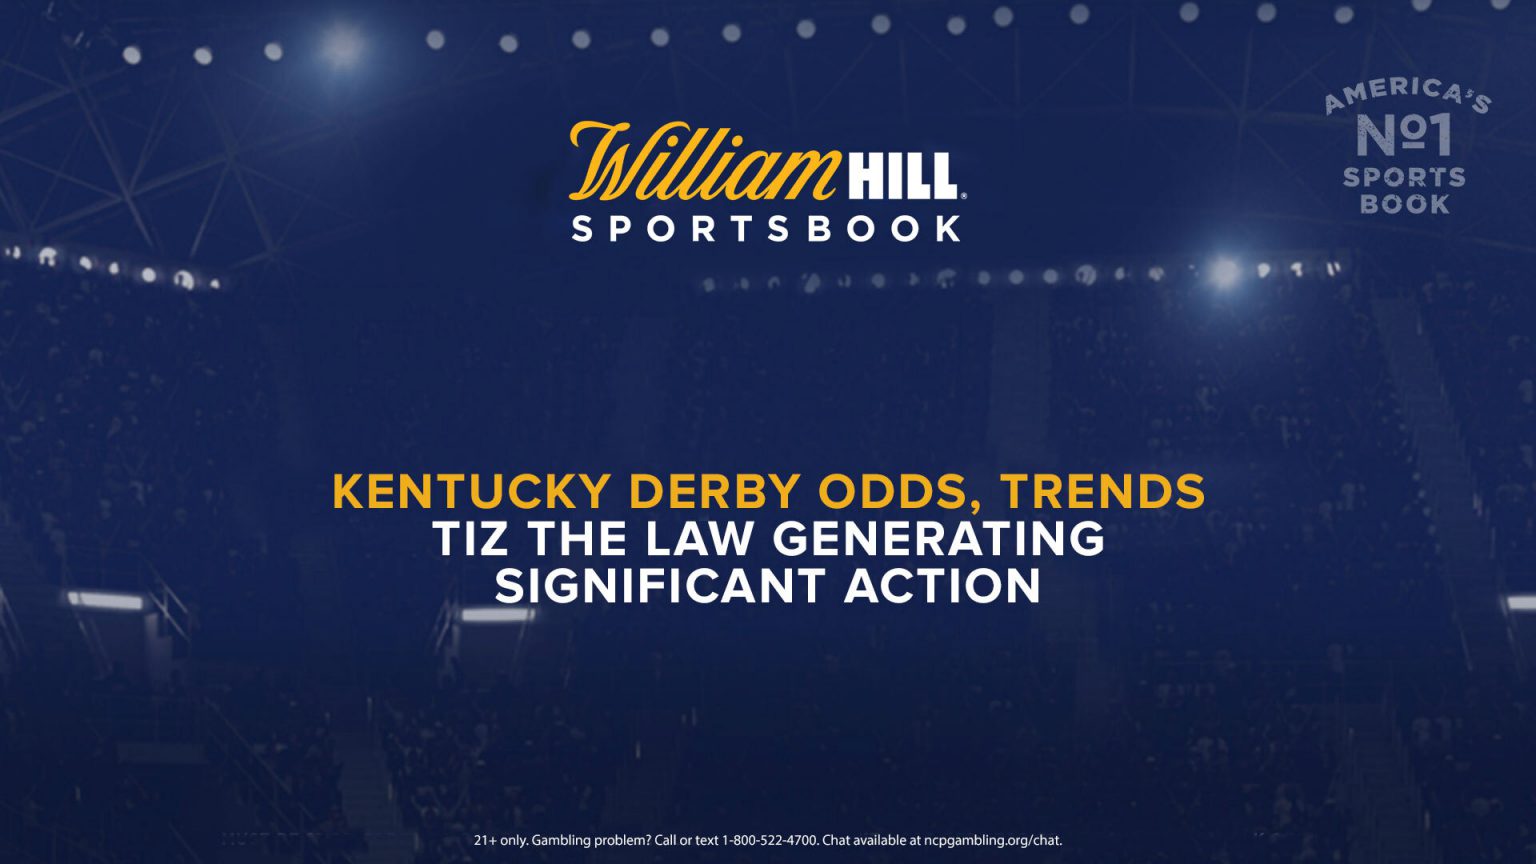 Kentucky Derby Odds, Trends Tiz the Law Generating Significant Action